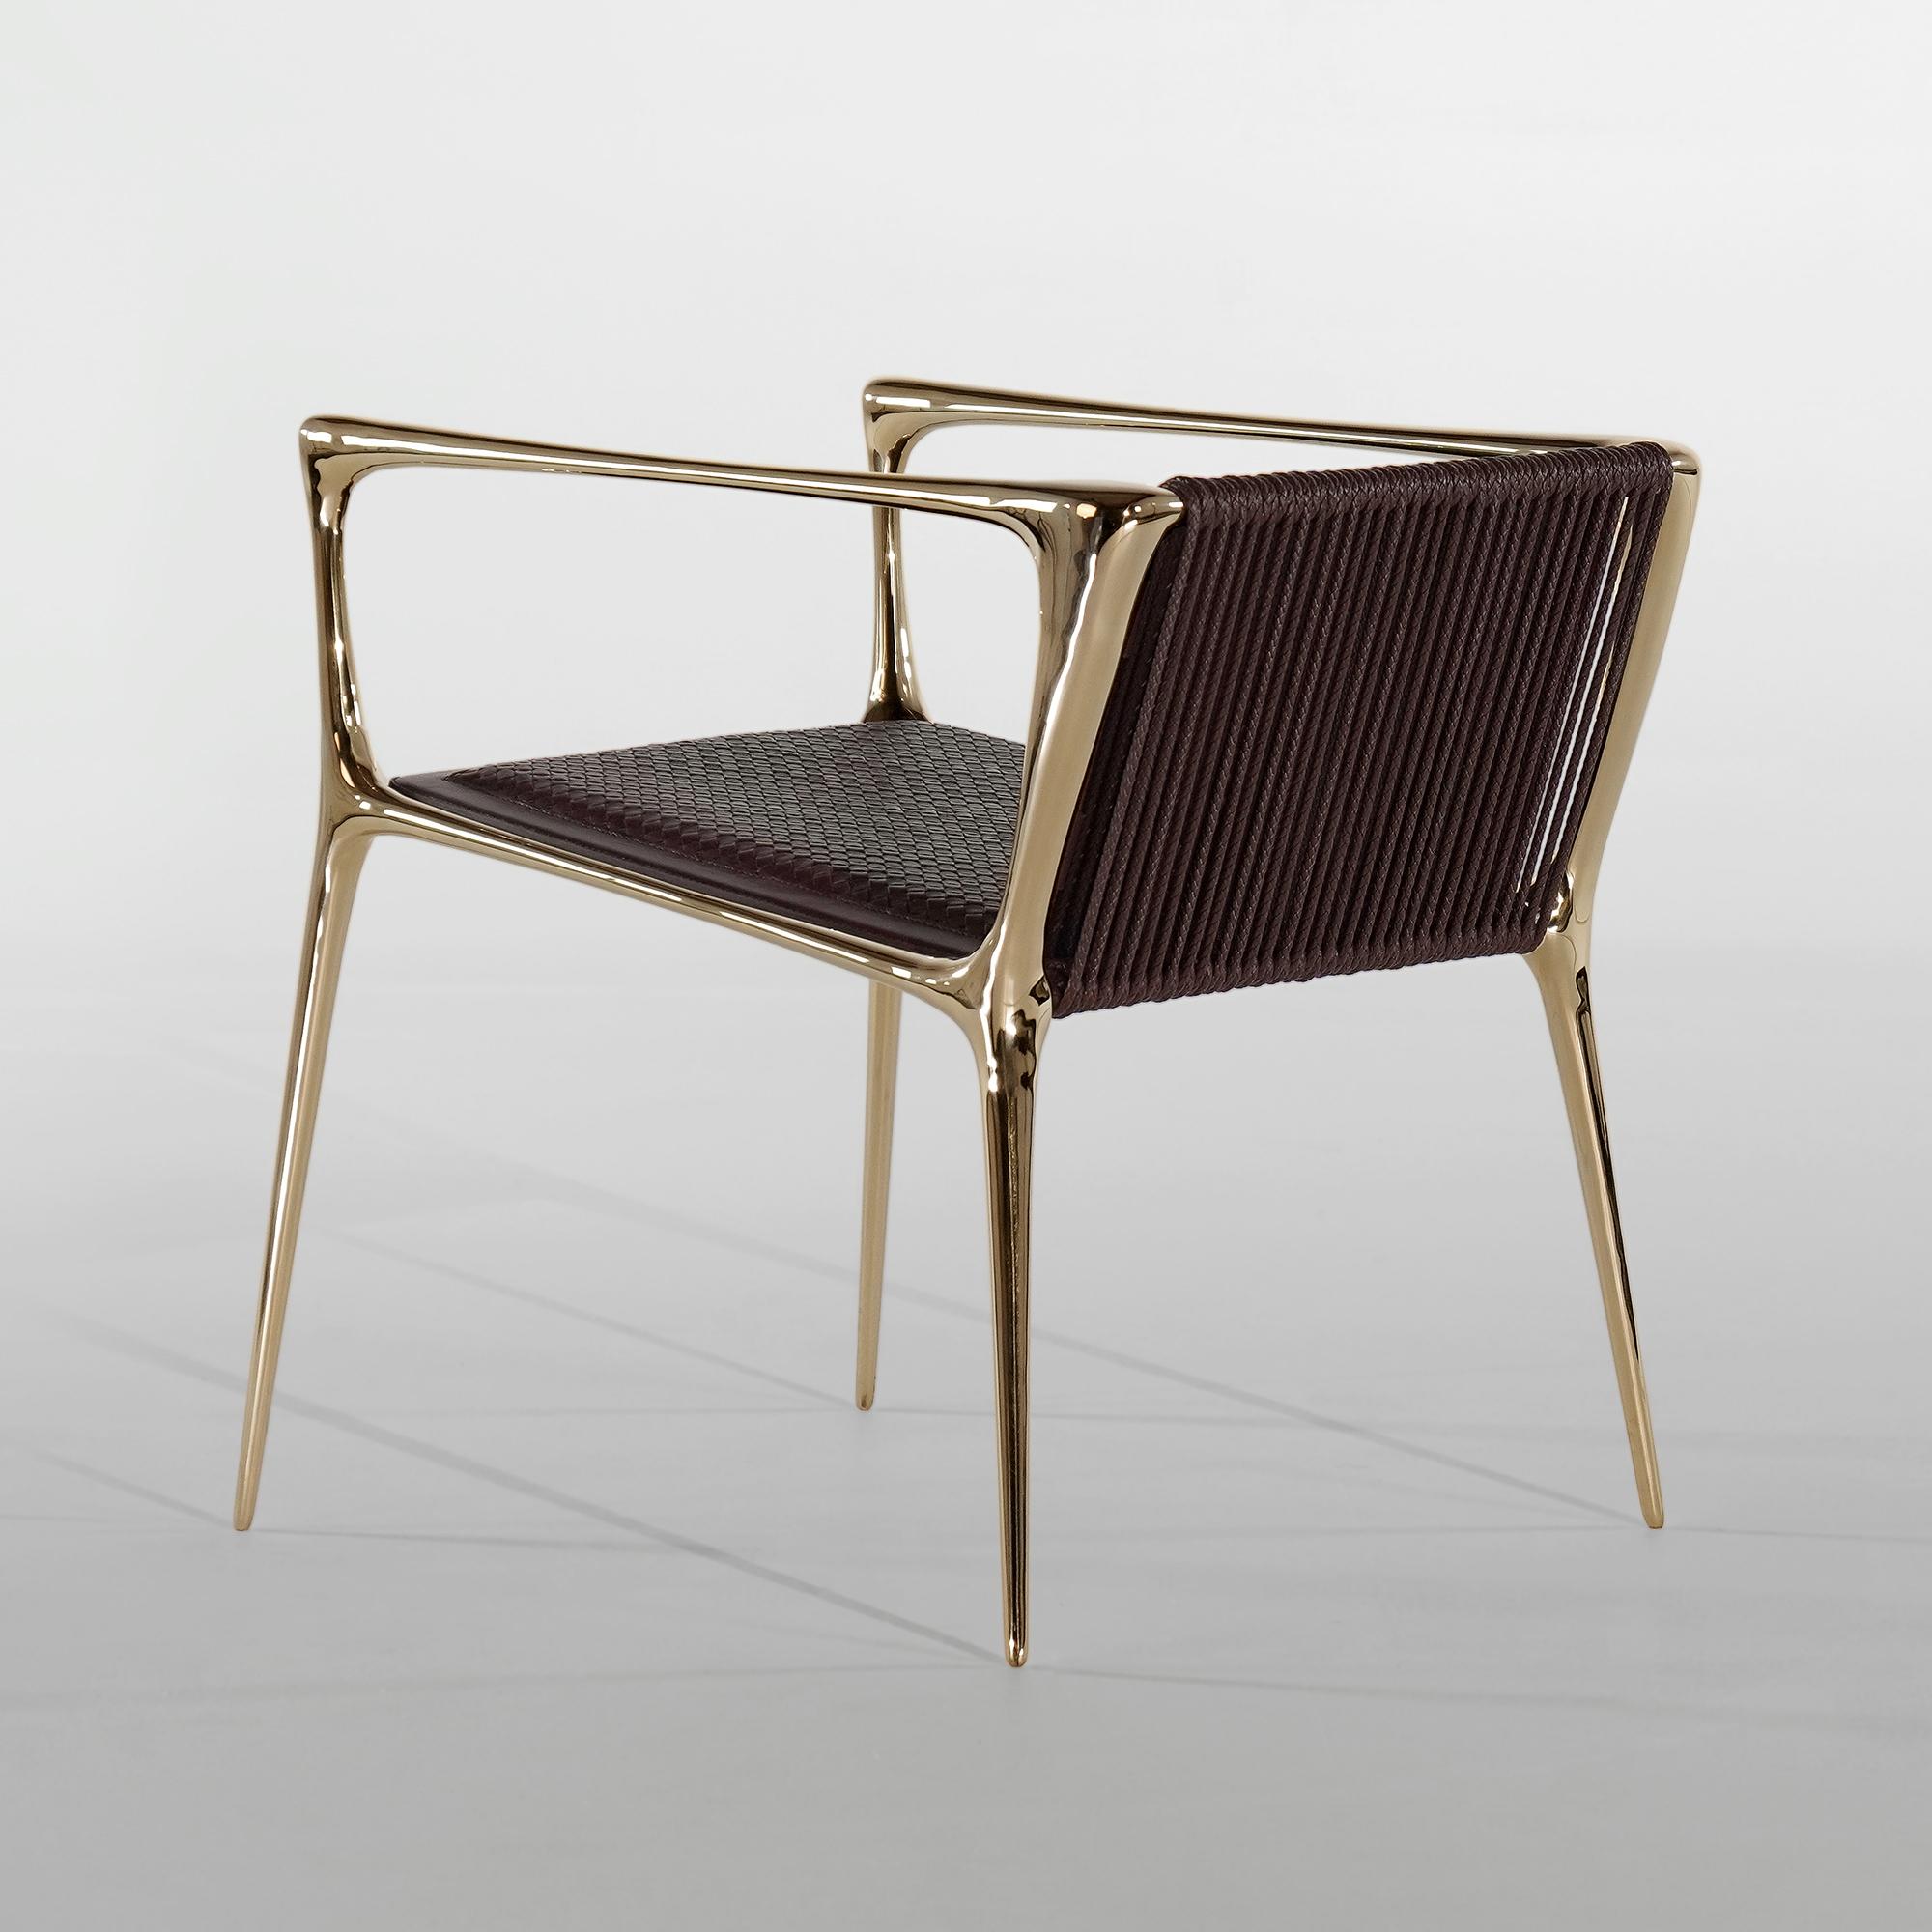 
The Sophiel Chair features a graceful bronze frame and upholstery. The Sophiel effortlessly charms with its juxtaposed nature, starting from its woven leather upholstery and finally complemented by a smooth polished bronze frame. Available in